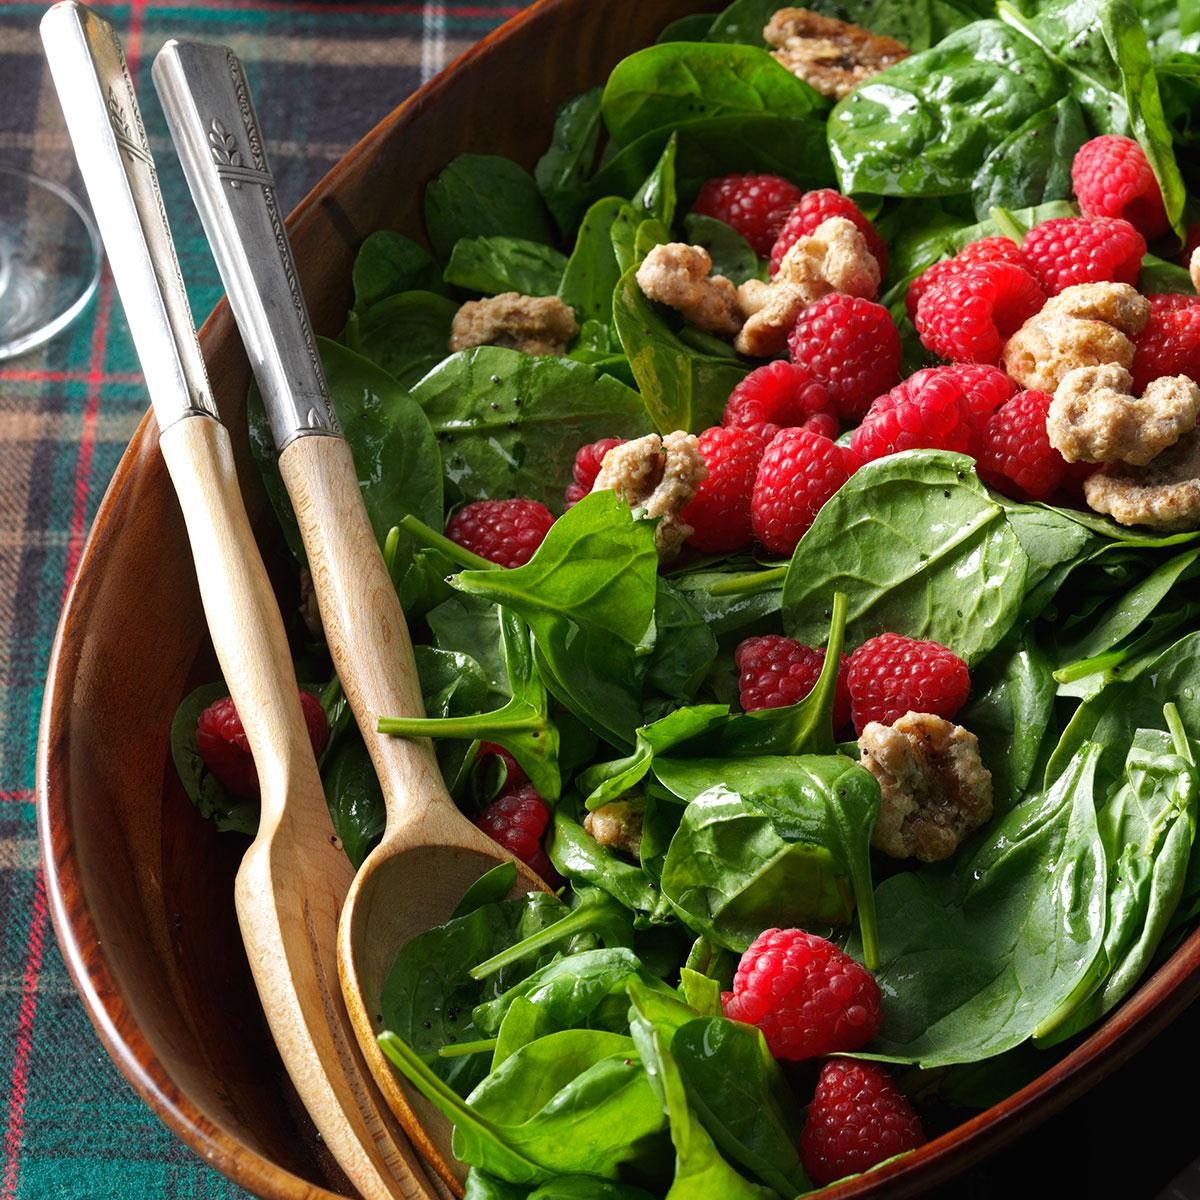 Spinach Salad with Raspberries & Candied Walnuts